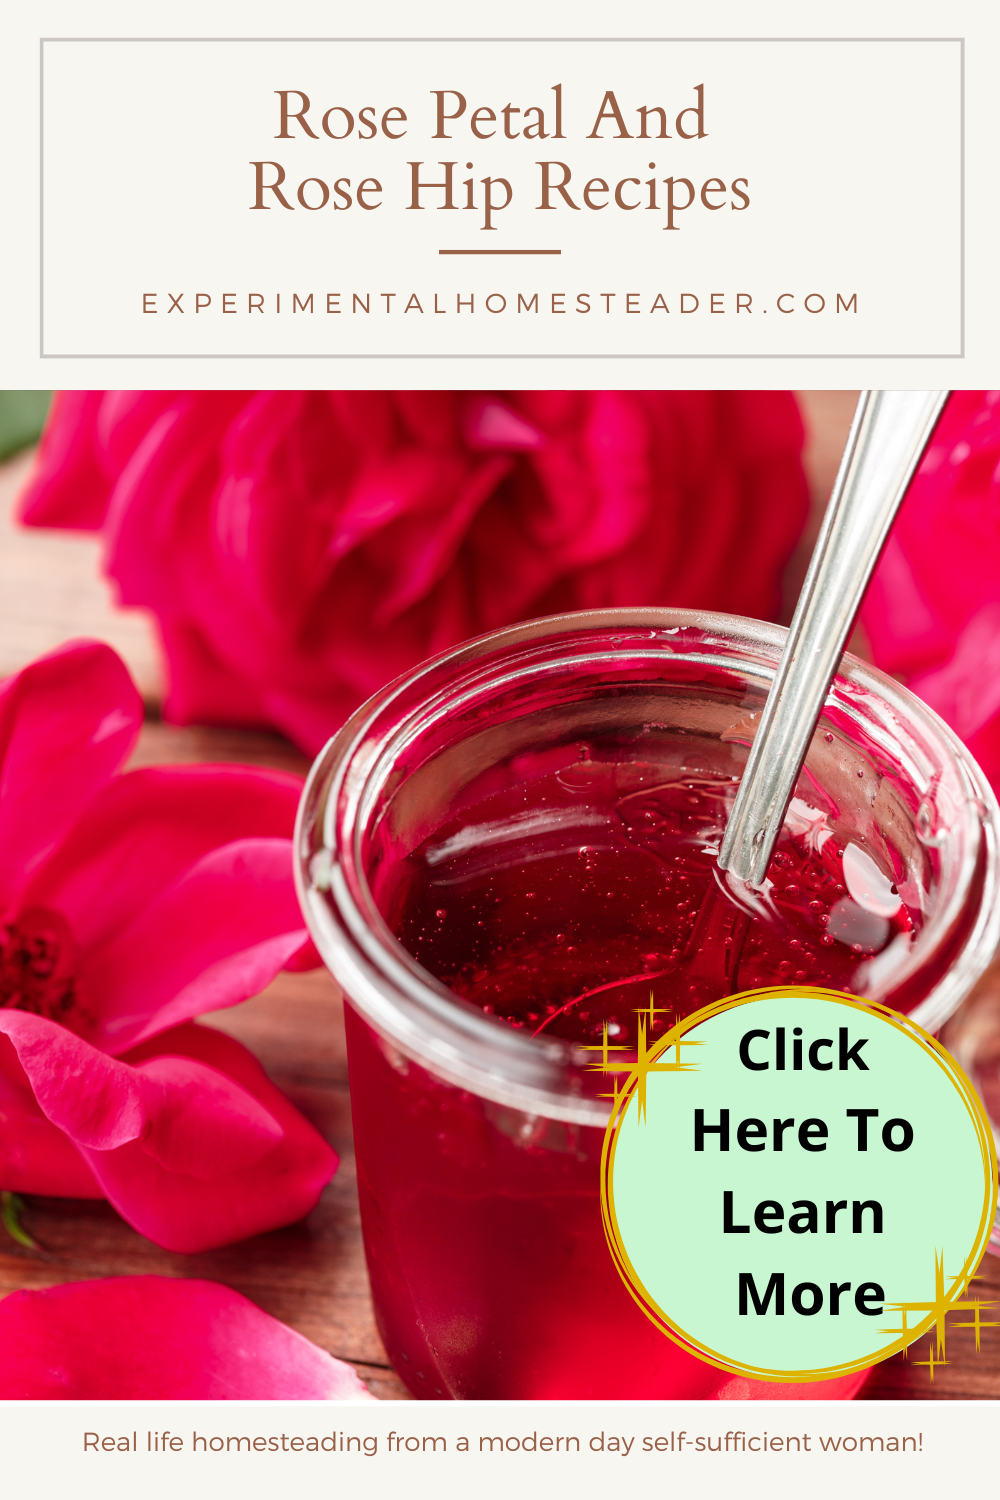 A jar of rose petal jelly opened with a spoon inside and red roses behind it.